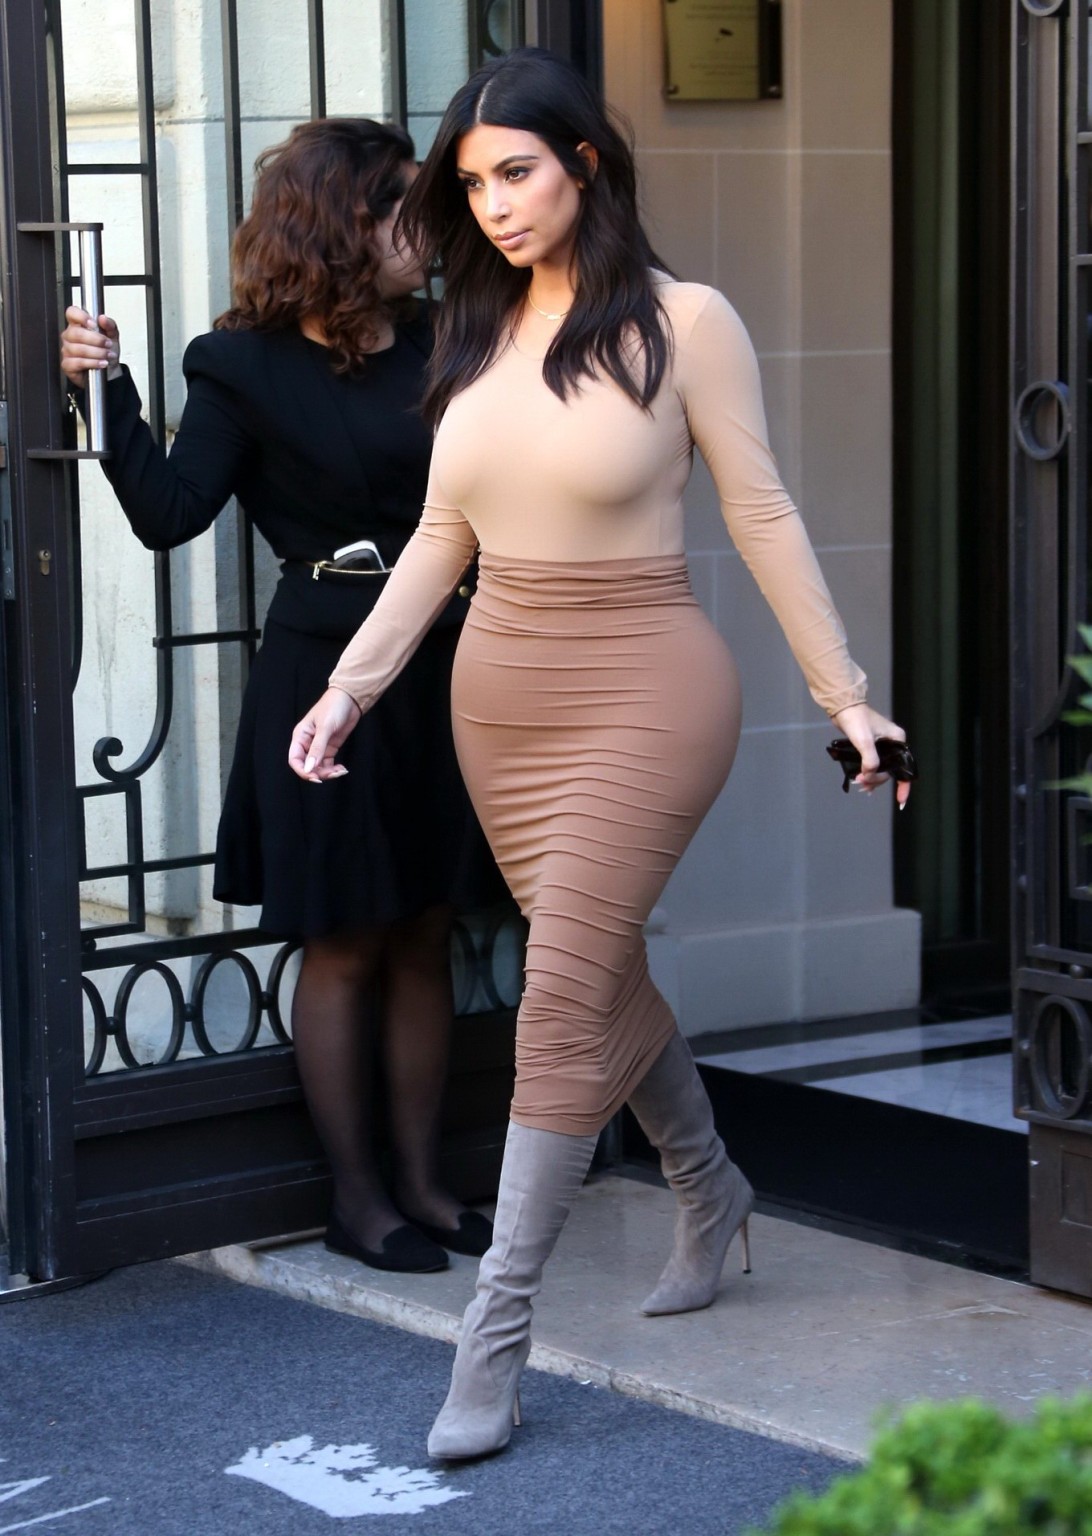 Kim Kardashian shows off her curvy body wearing tight top and skirt outside Le R #75184922